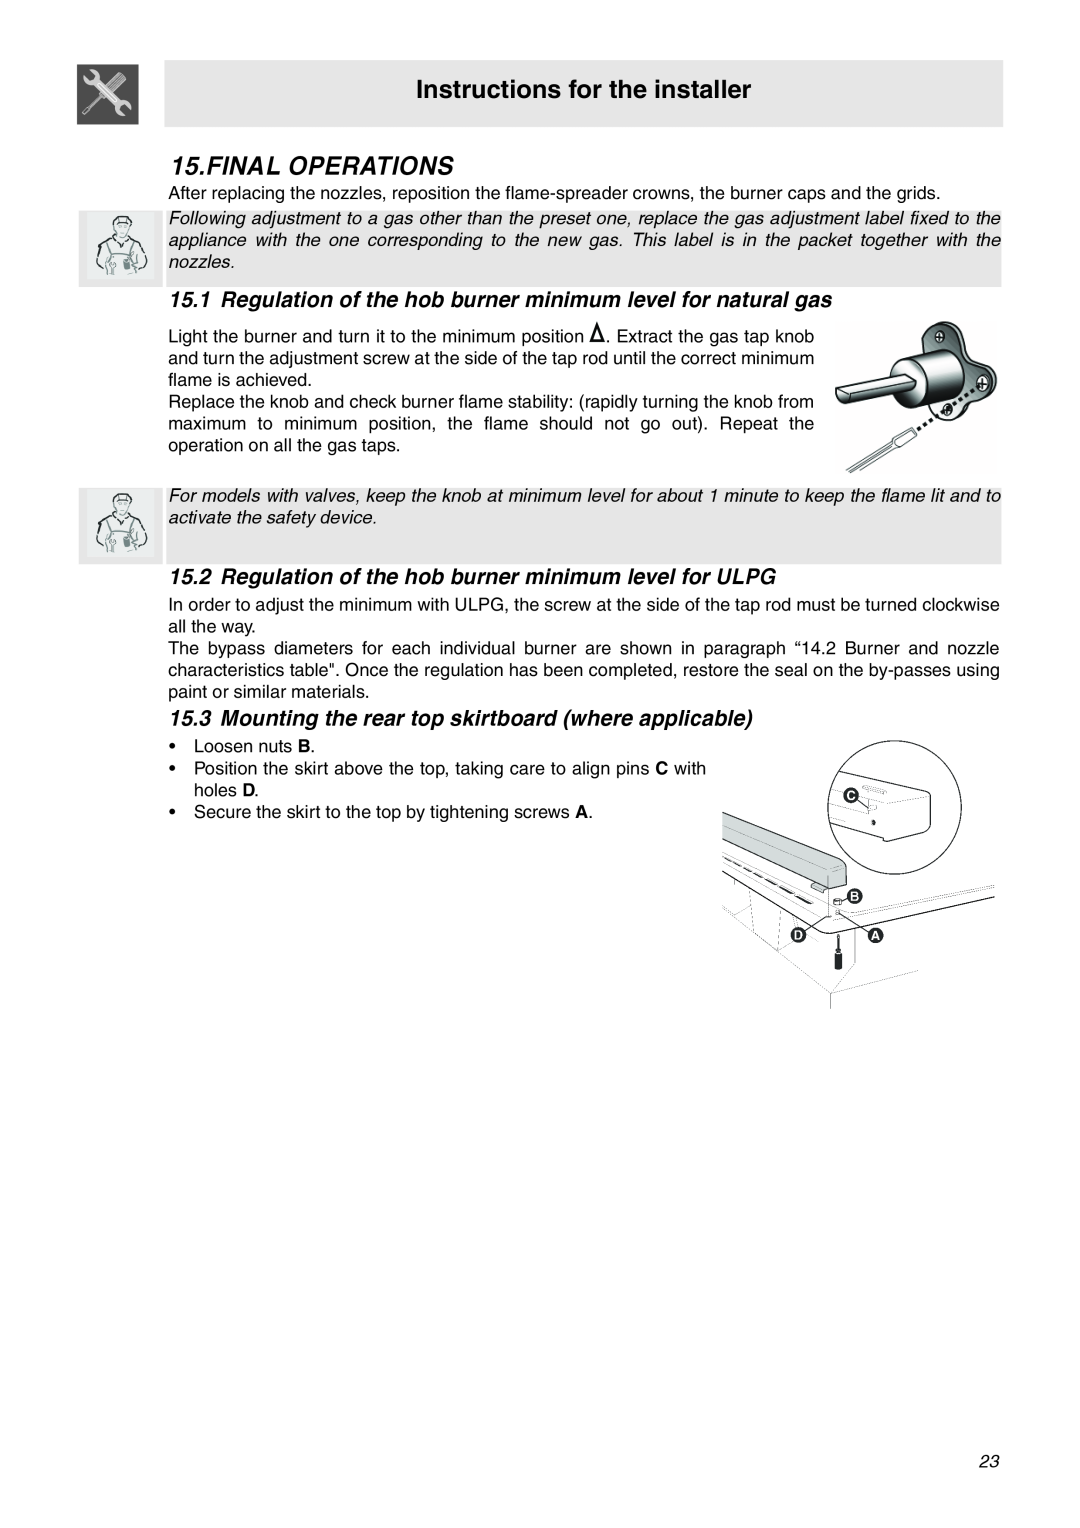 Smeg SA92MFX5 manual Final Operations, Instructions for the installer 